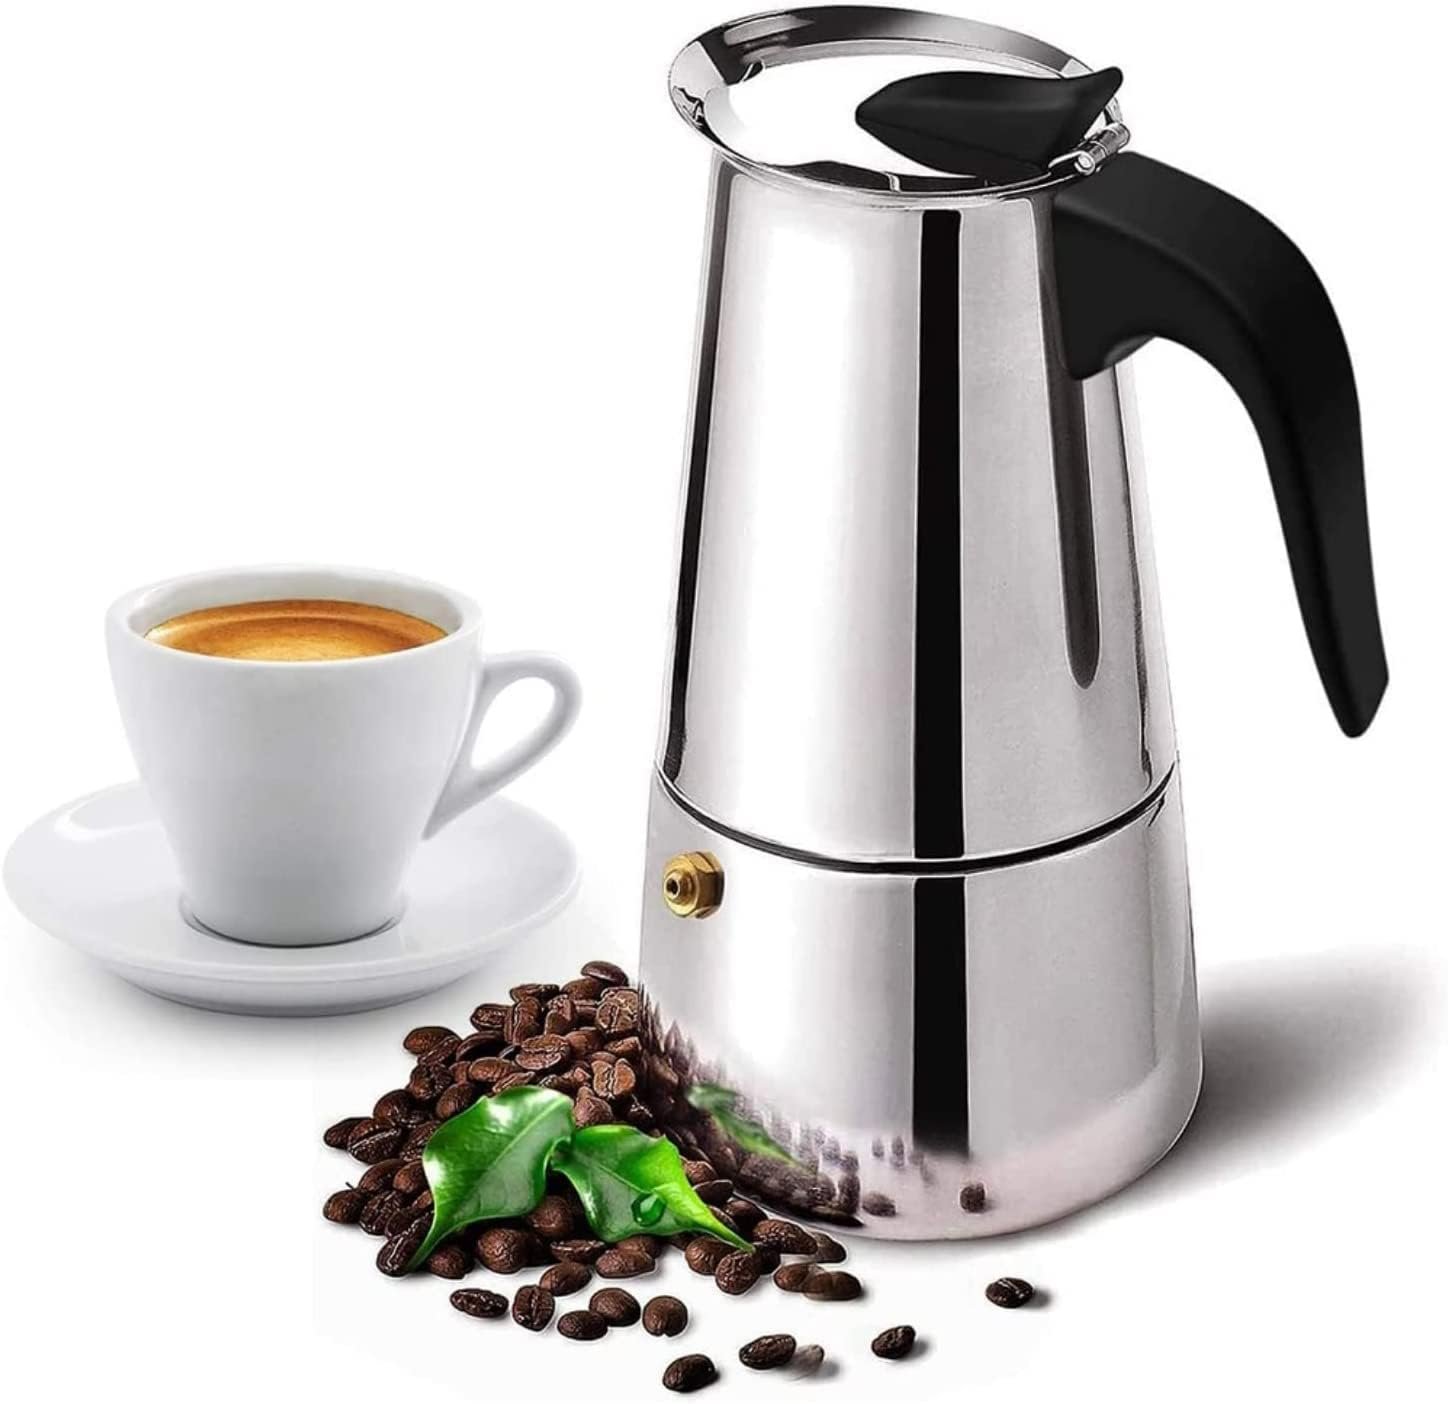 Coffee Pot, Stainless Steel Moka Pot Italian Coffee Maker 6 cup/10 OZ Stovetop Espresso Maker for Gas or Electric Ceramic Stovetop Camping Manual Cuban Coffee Percolator for Cappuccino or Latte